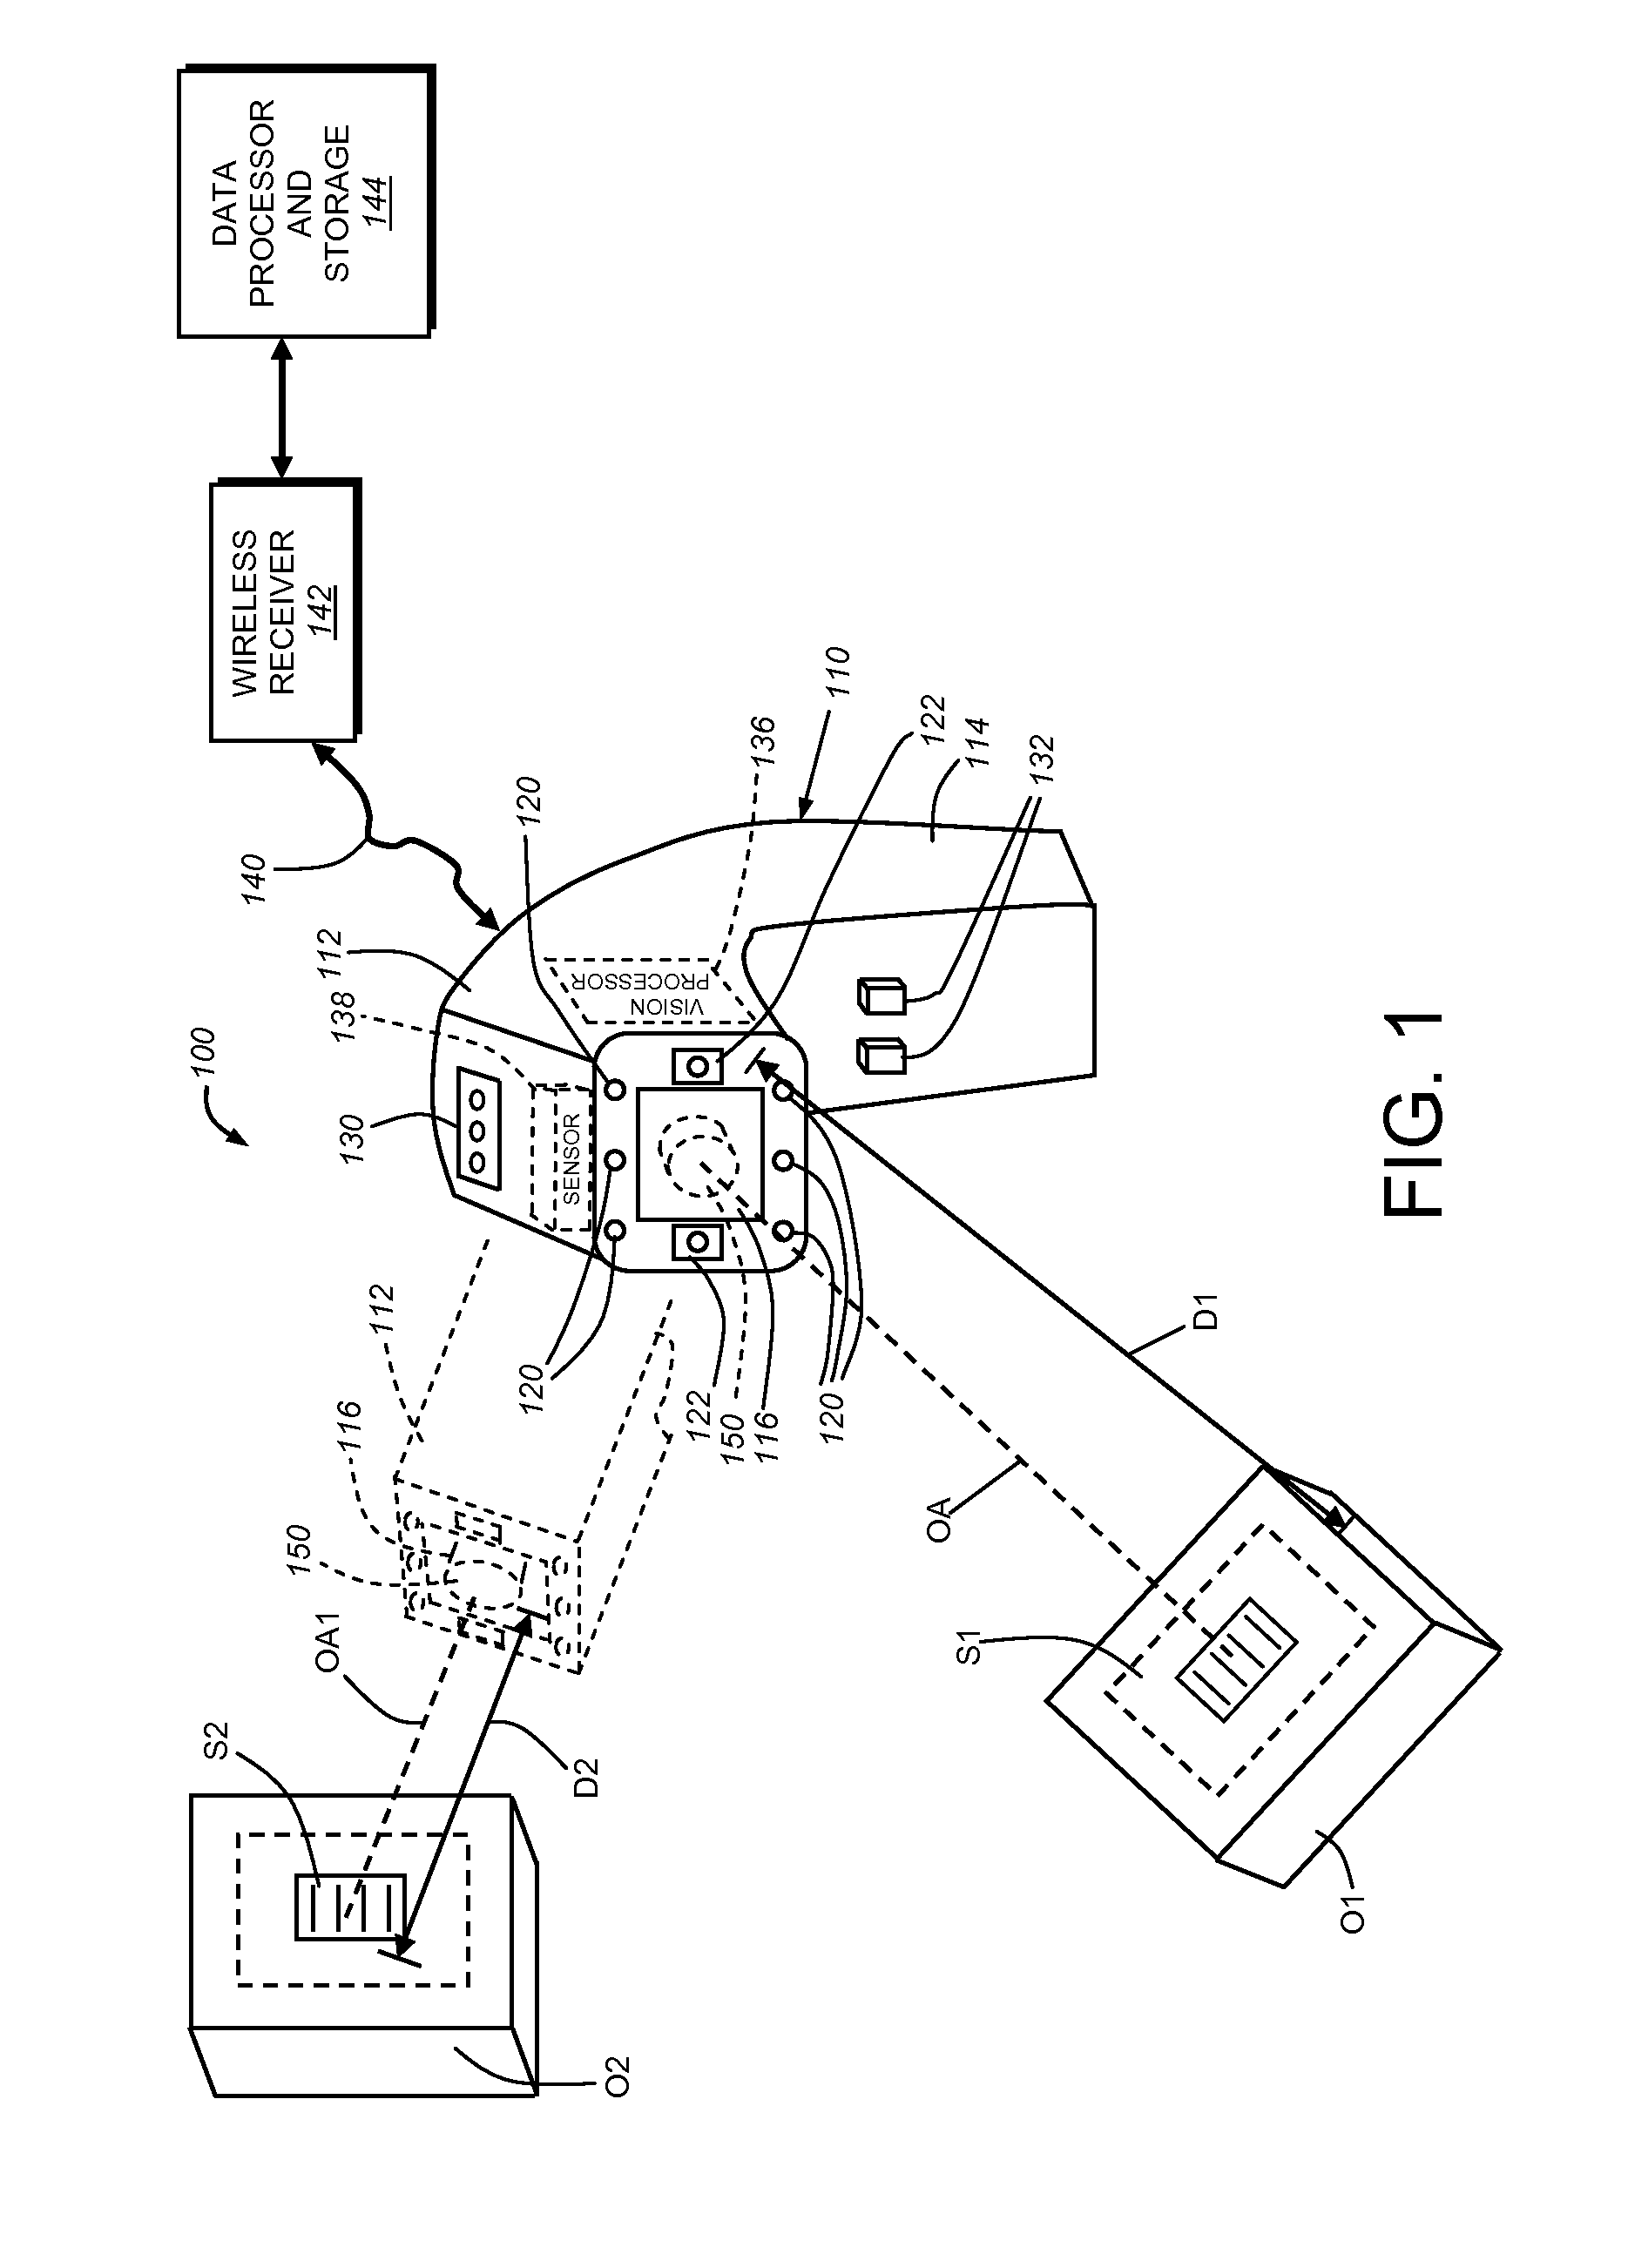 System and method for determination and adjustment of camera parameters using multi-gain images